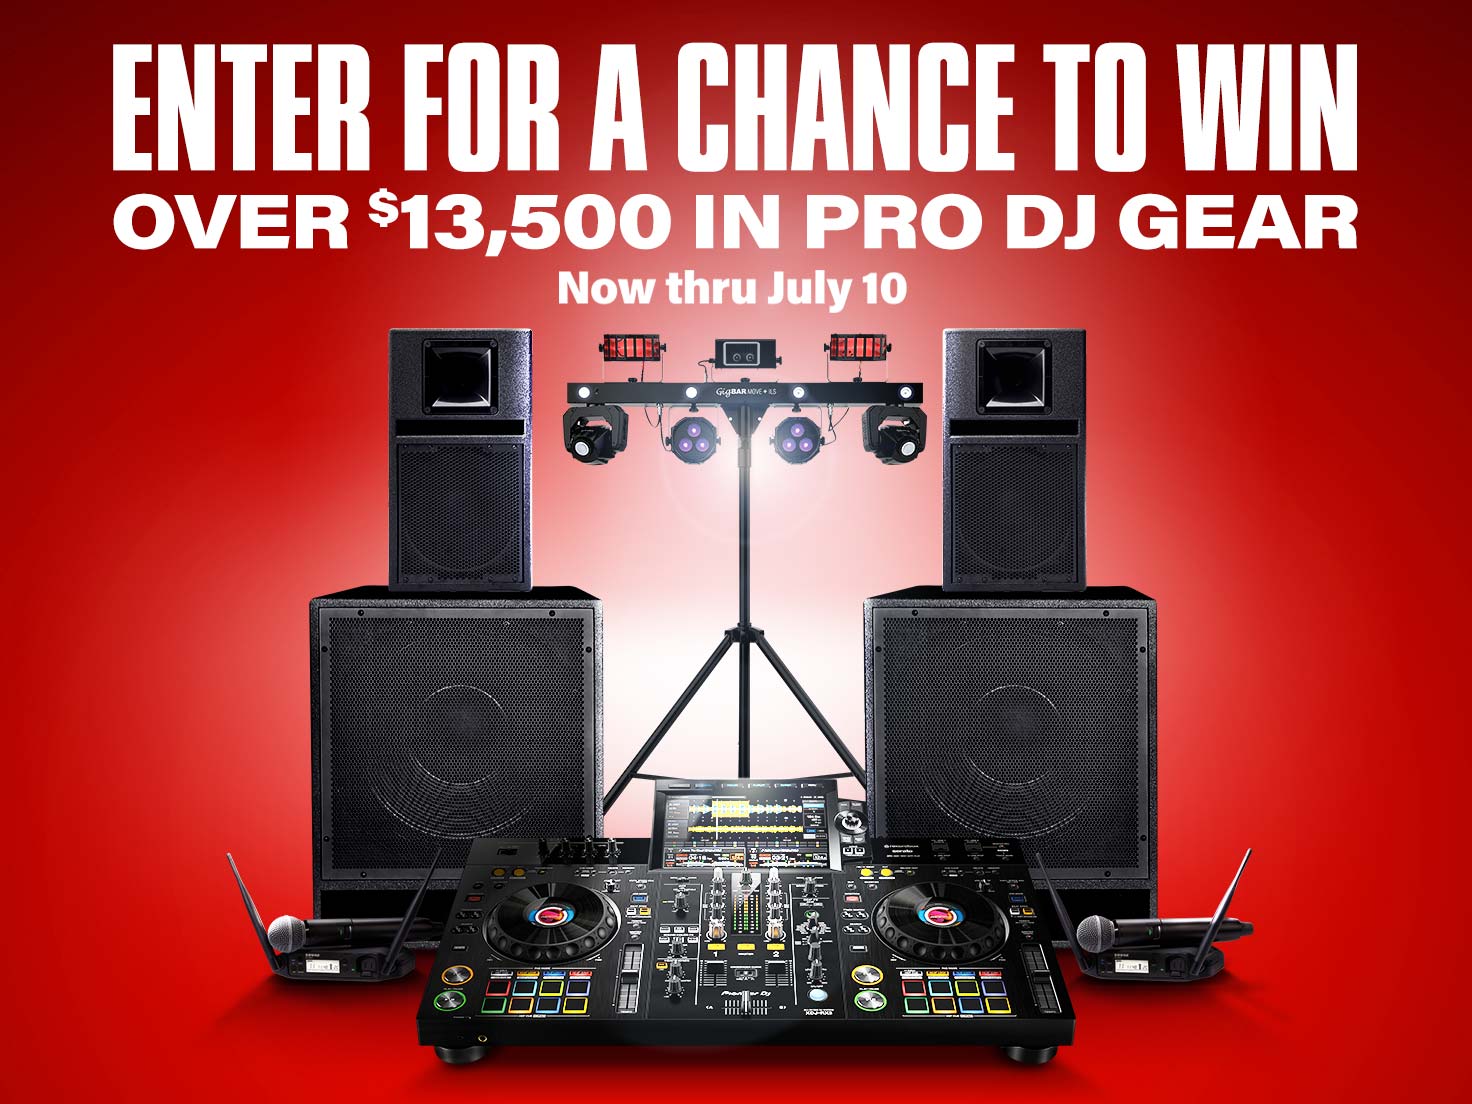 Enter for a chance to win over 13500 dollars in PRO DJ gear. Now thru July 10